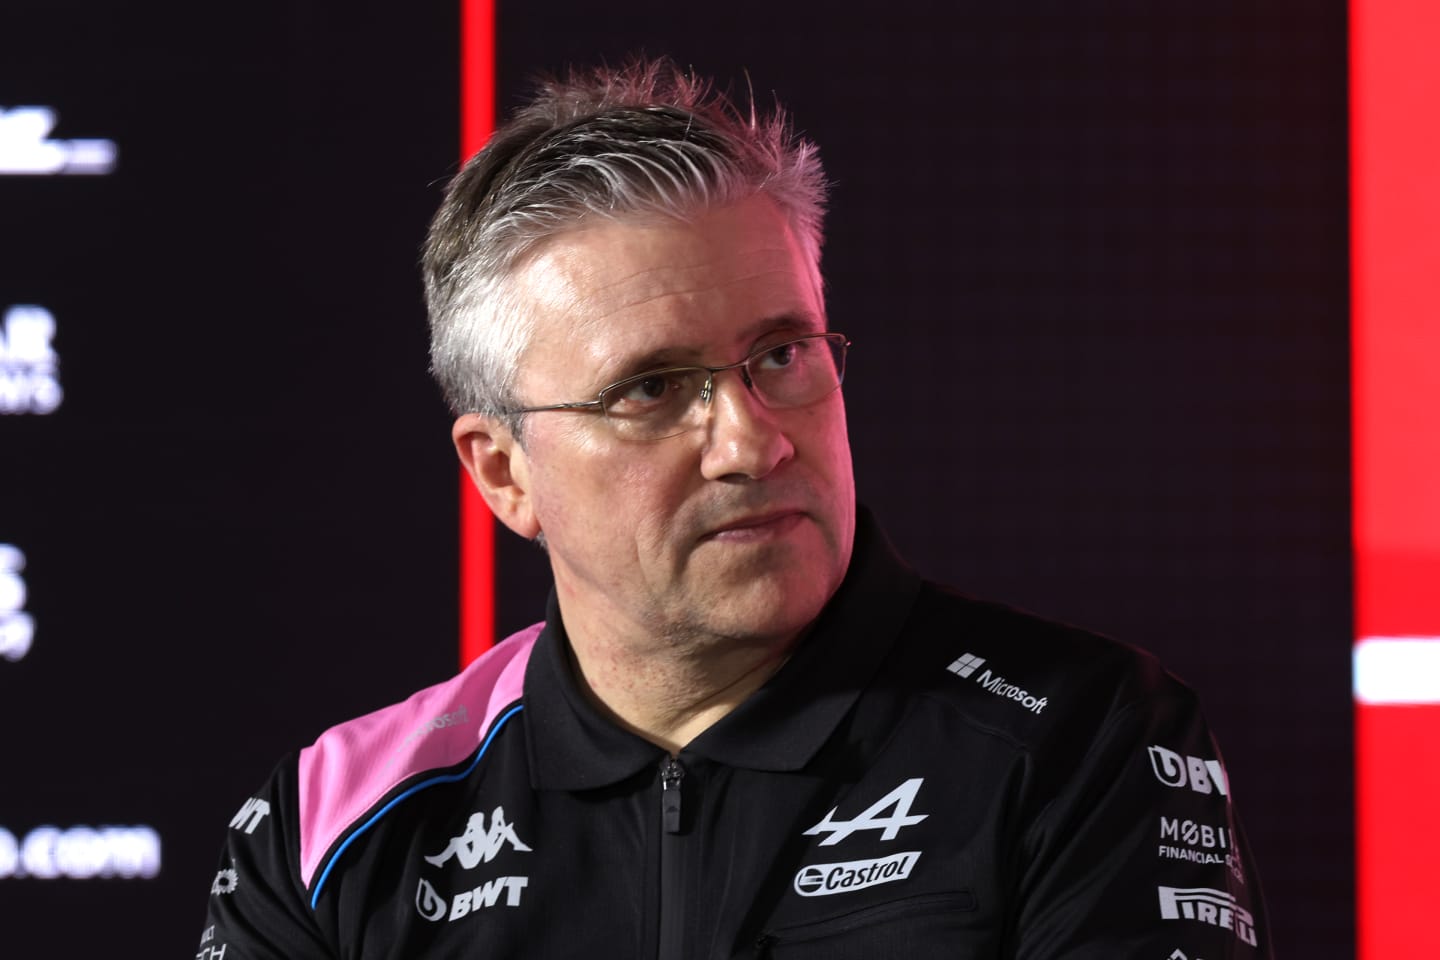 BAHRAIN, BAHRAIN - MARCH 03: Pat Fry, Chief Technical Officer of Alpine F1 attends the Team Principals Press Conference during practice ahead of the F1 Grand Prix of Bahrain at Bahrain International Circuit on March 03, 2023 in Bahrain, Bahrain. (Photo by Lars Baron/Getty Images)